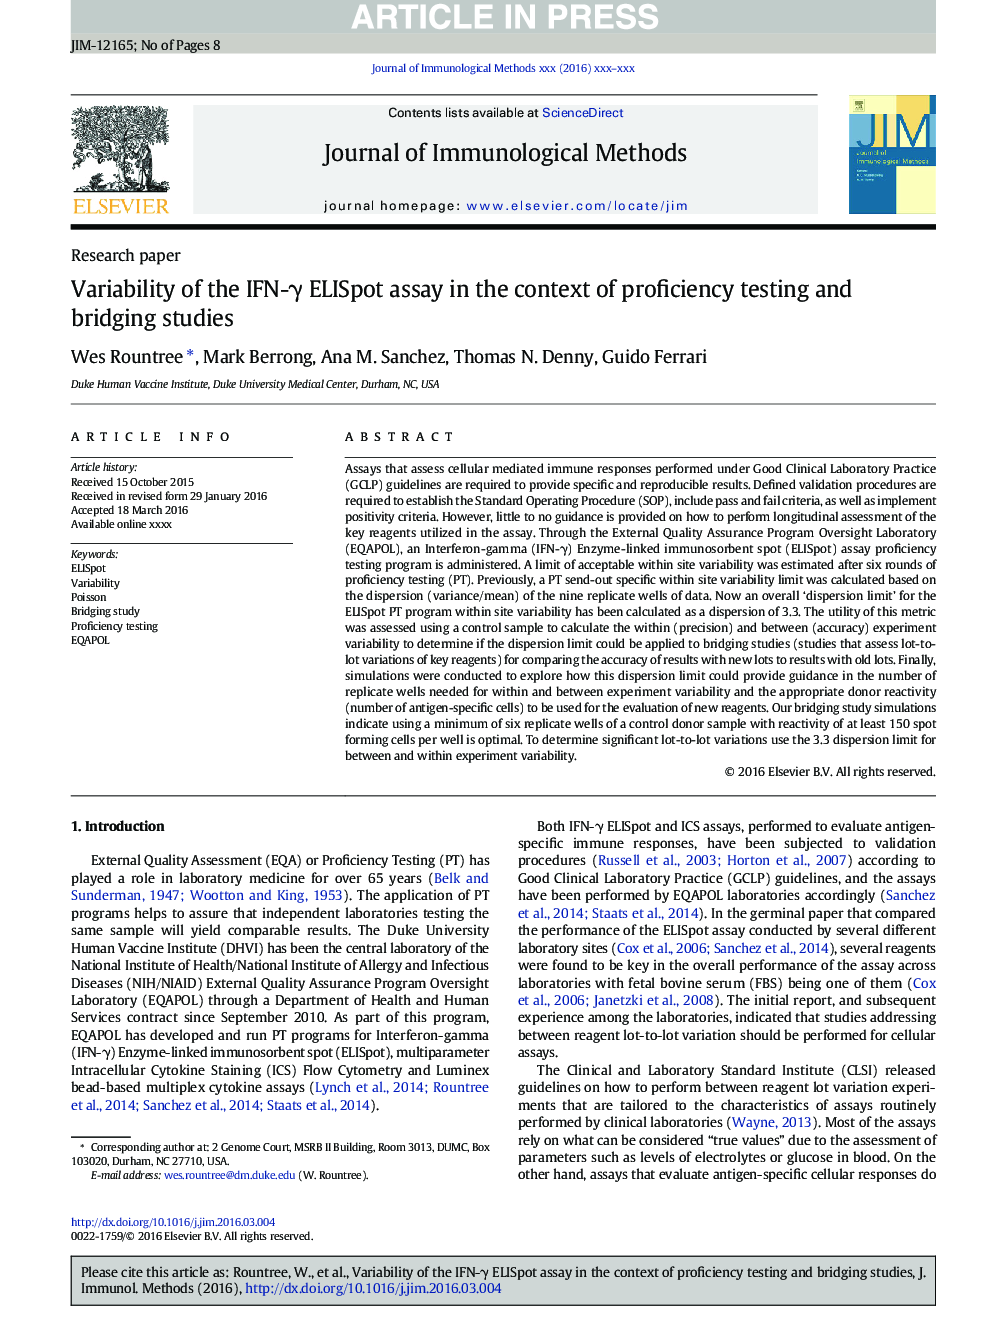 Variability of the IFN-Î³ ELISpot assay in the context of proficiency testing and bridging studies